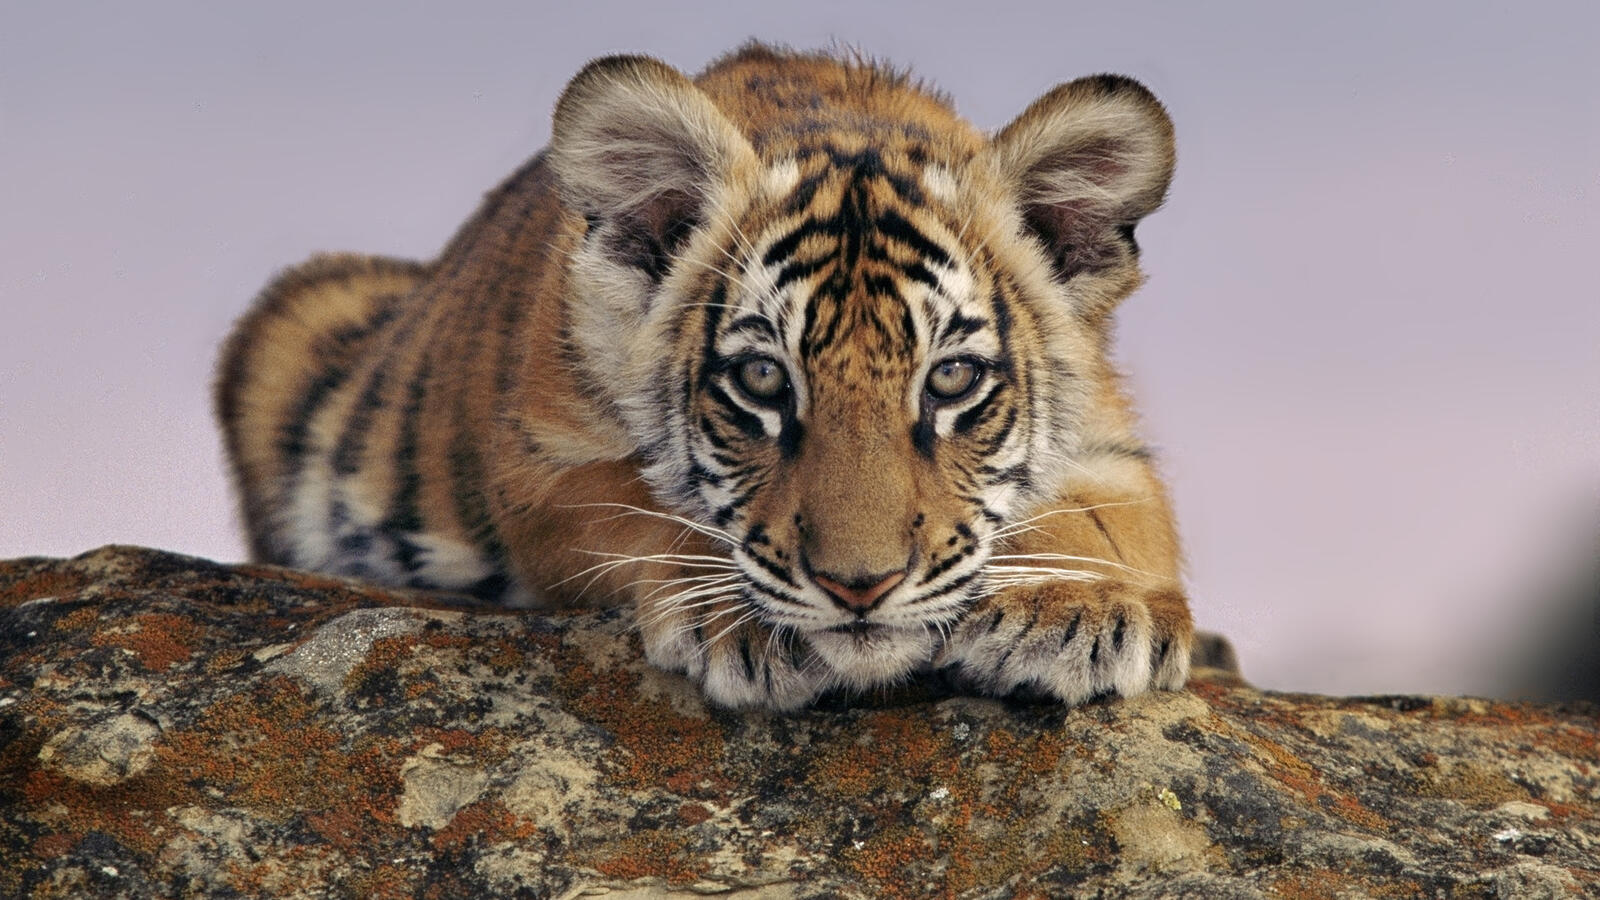 Wallpapers tiger cub small ears on the desktop